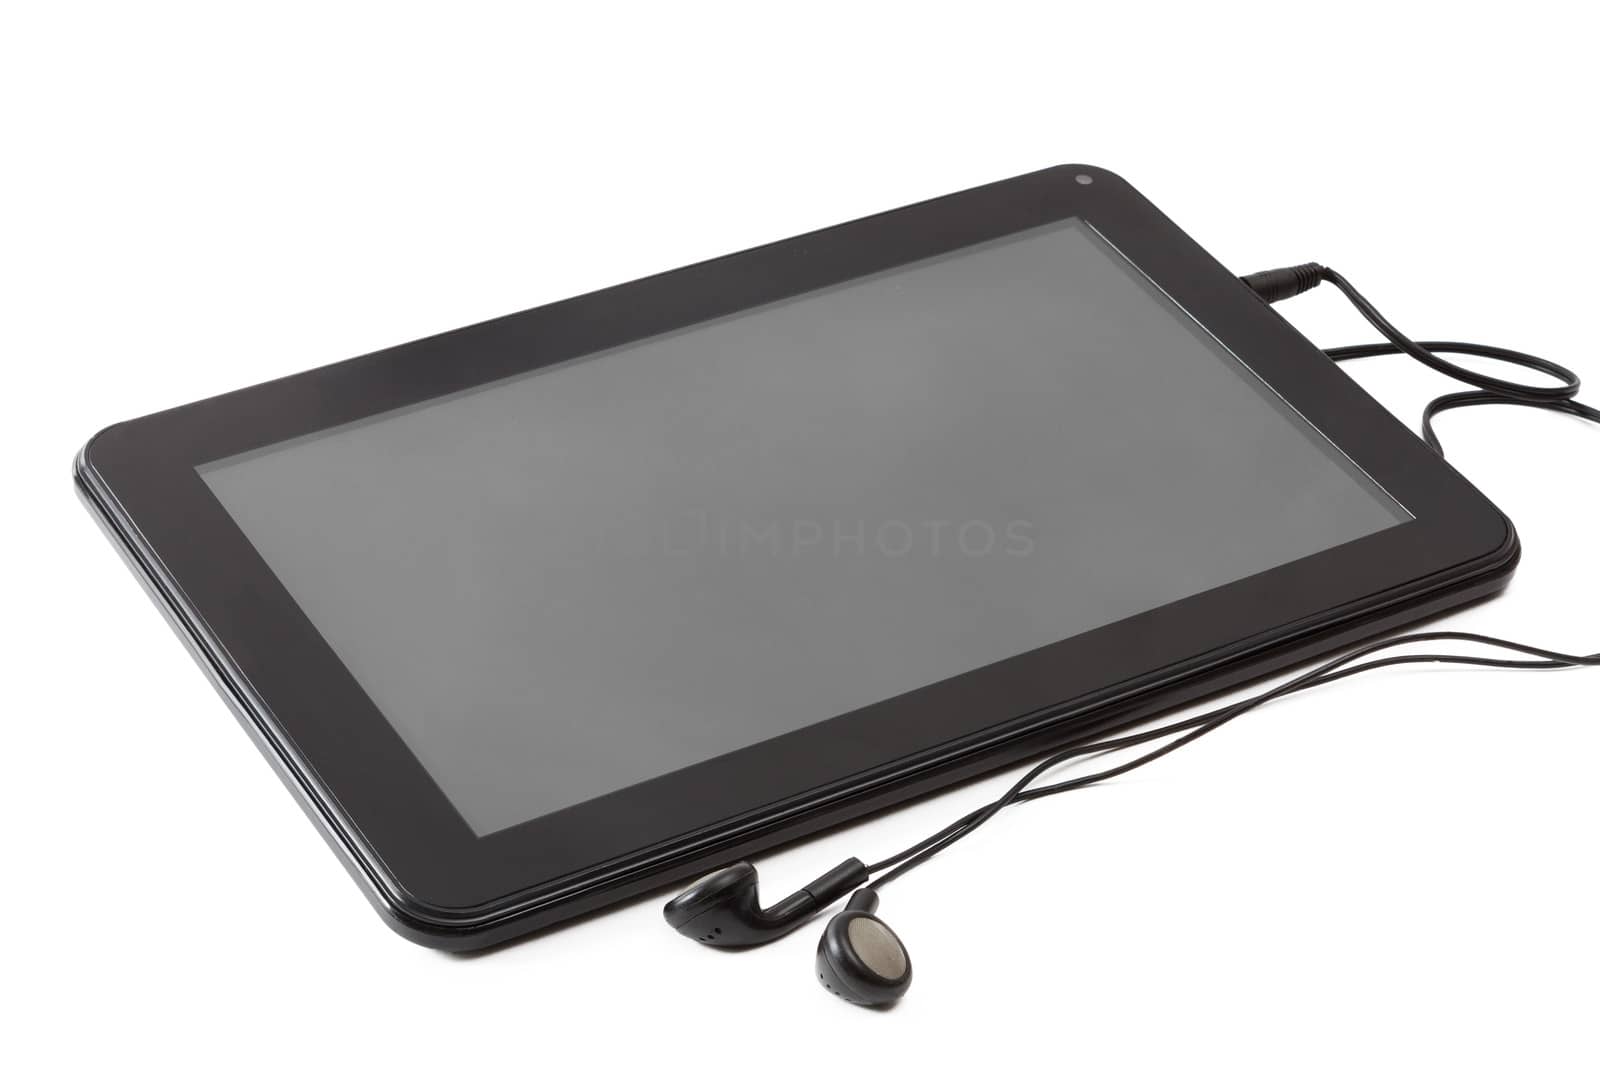 Tablet computer with headphones isolated on white background